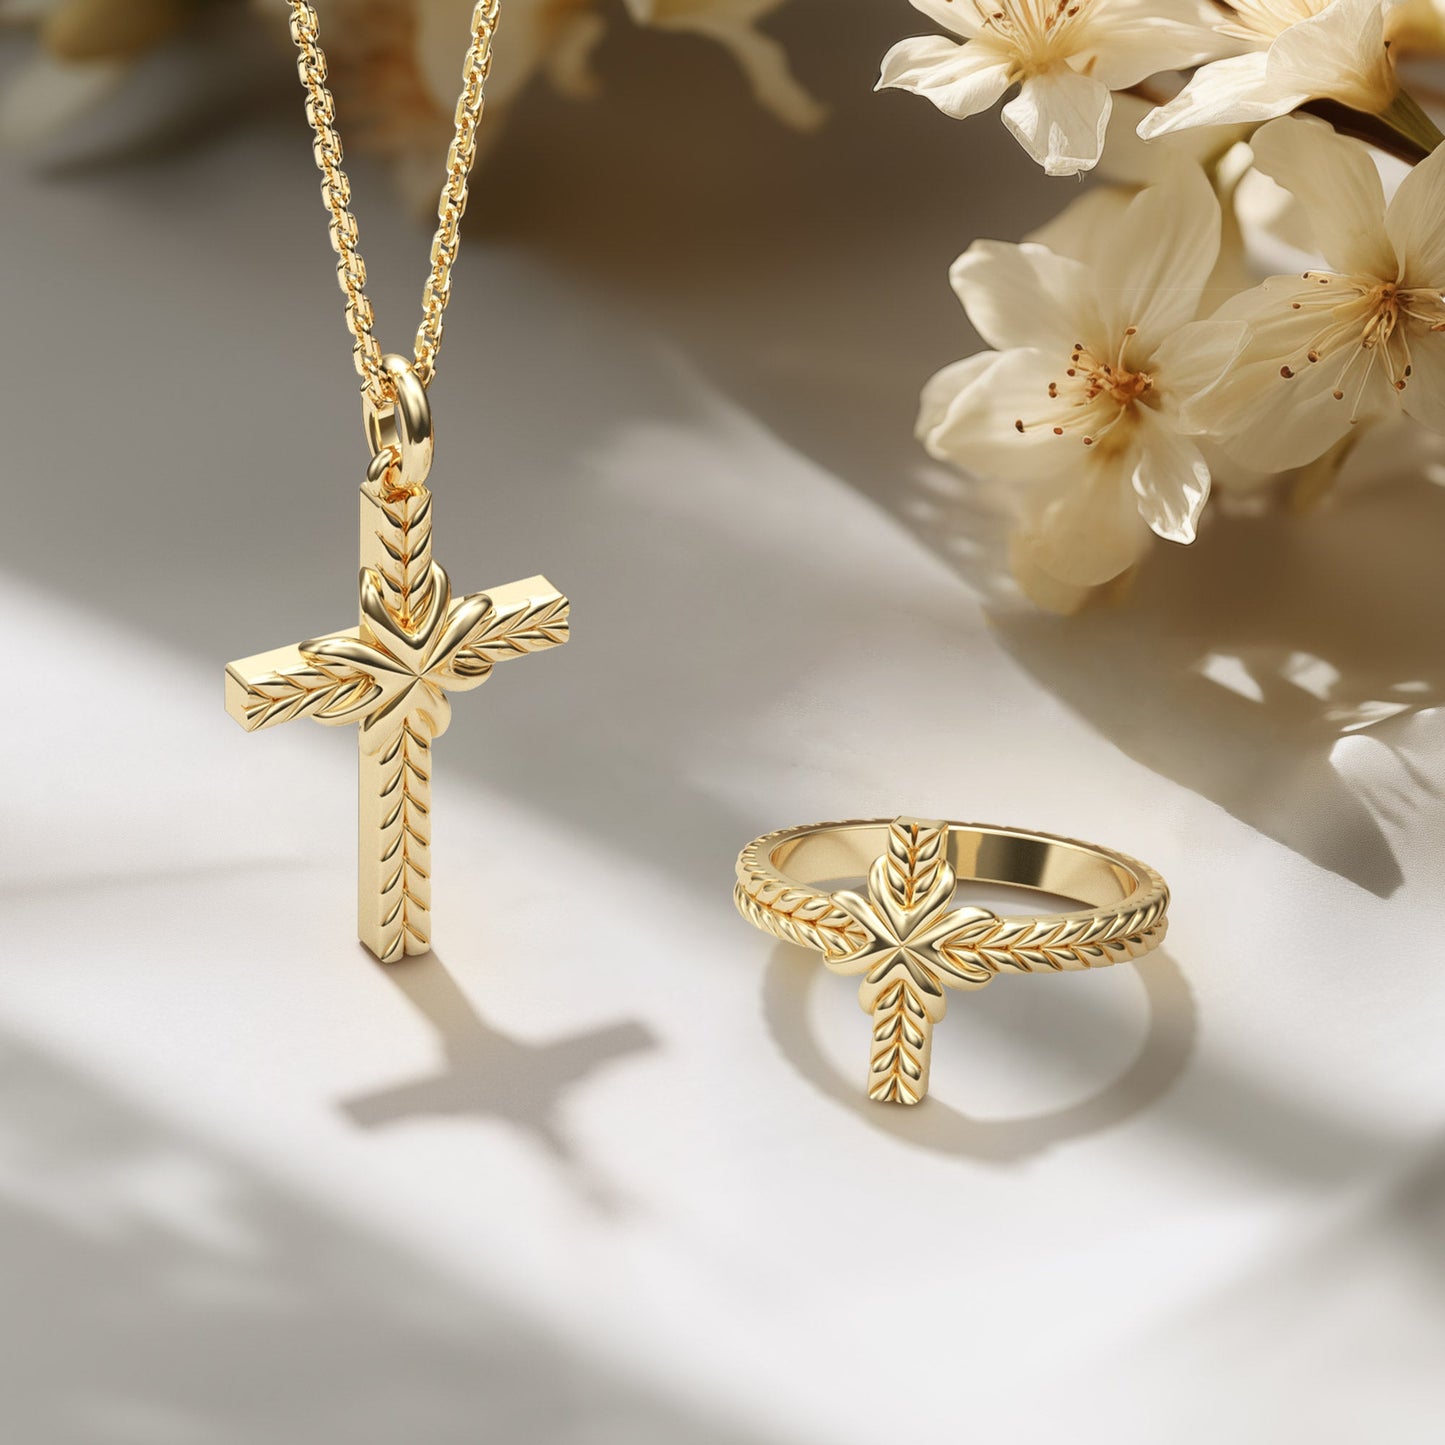 Bread of Life Cross Necklace